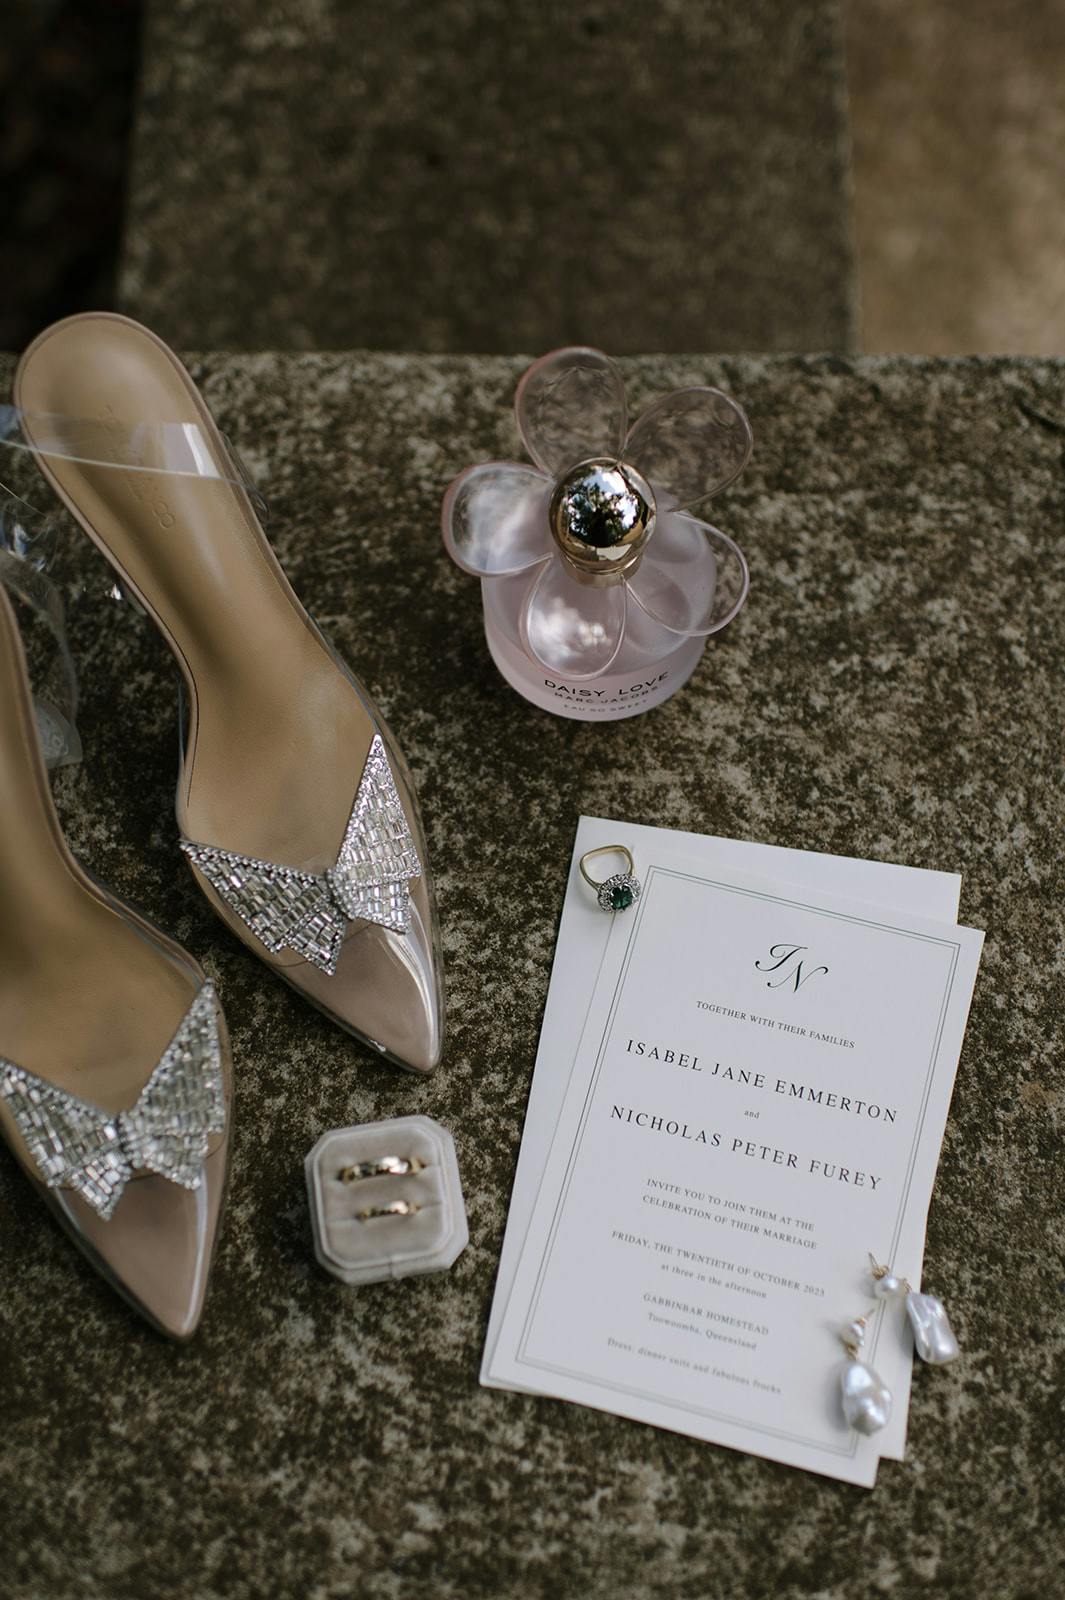 A flat lay photo of wedding items: a pair of transparent and jeweled pointed-toe high-heeled shoes, a bottle of Marc Jacobs Daisy perfume, a wedding invitation, pearl earrings, and two wedding rings in a box. The setting is an outdoor stone surface.